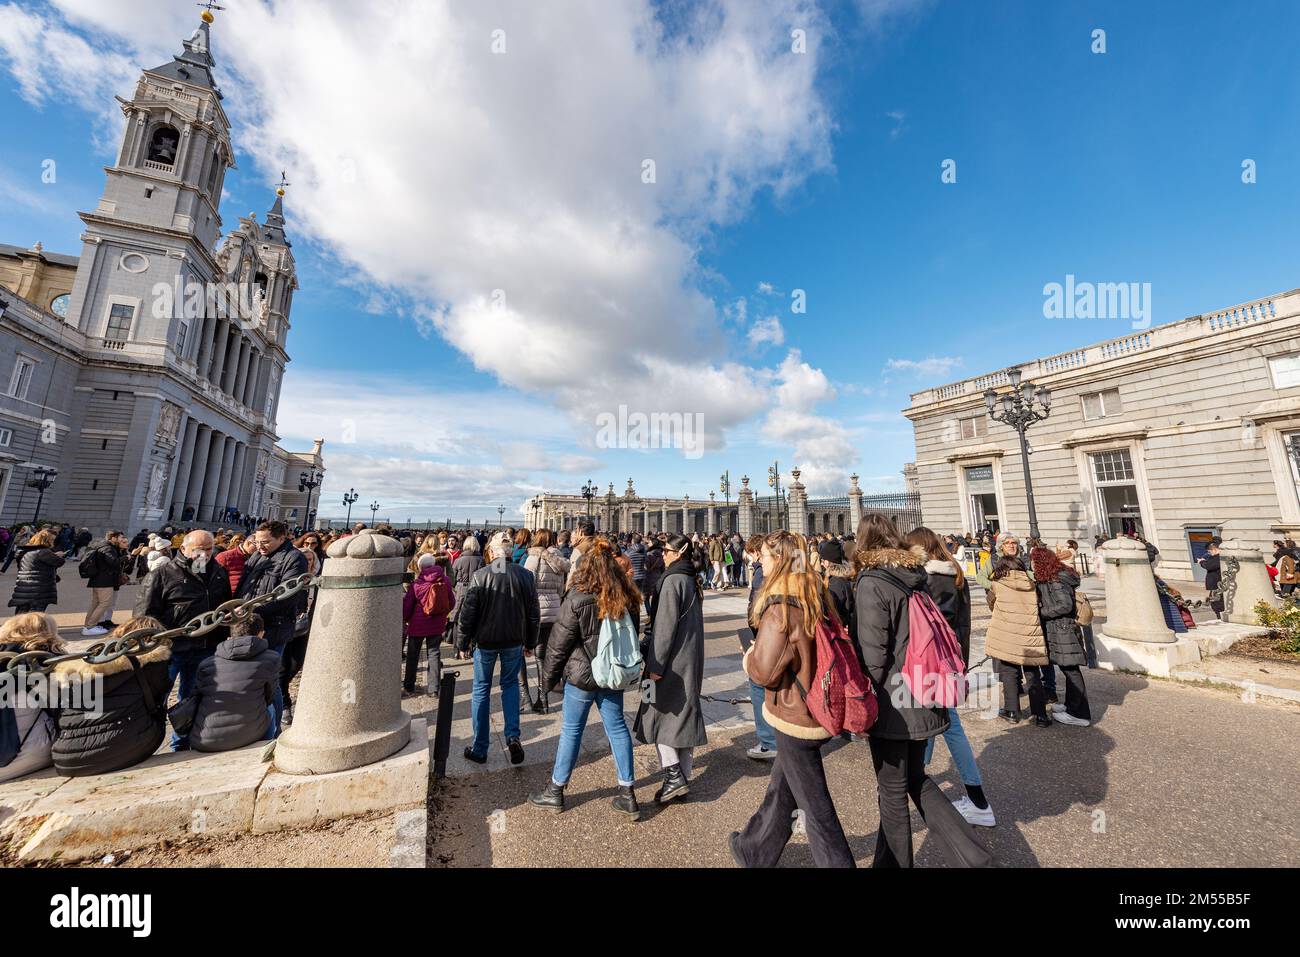 Madrid Royal Palace in Baroque style and the Almudena Cathedral (Catedral de Santa Maria la Real de la Almudena) in Madrid, Plaza de la Armeria, Spain Stock Photo